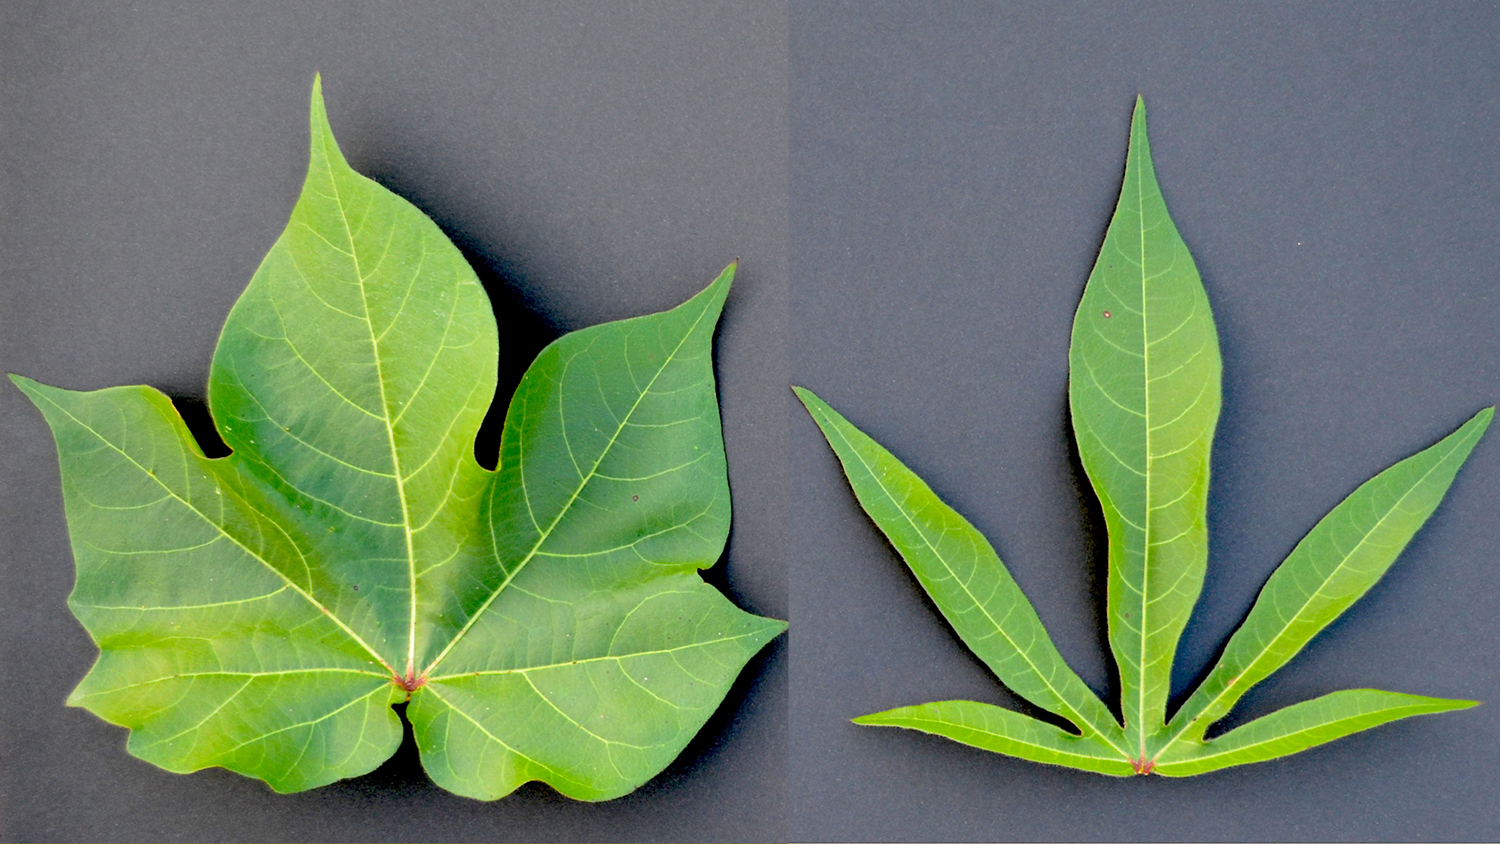 A broad and normal; cotton leaf compared to an okra-shaped cotton leaf.